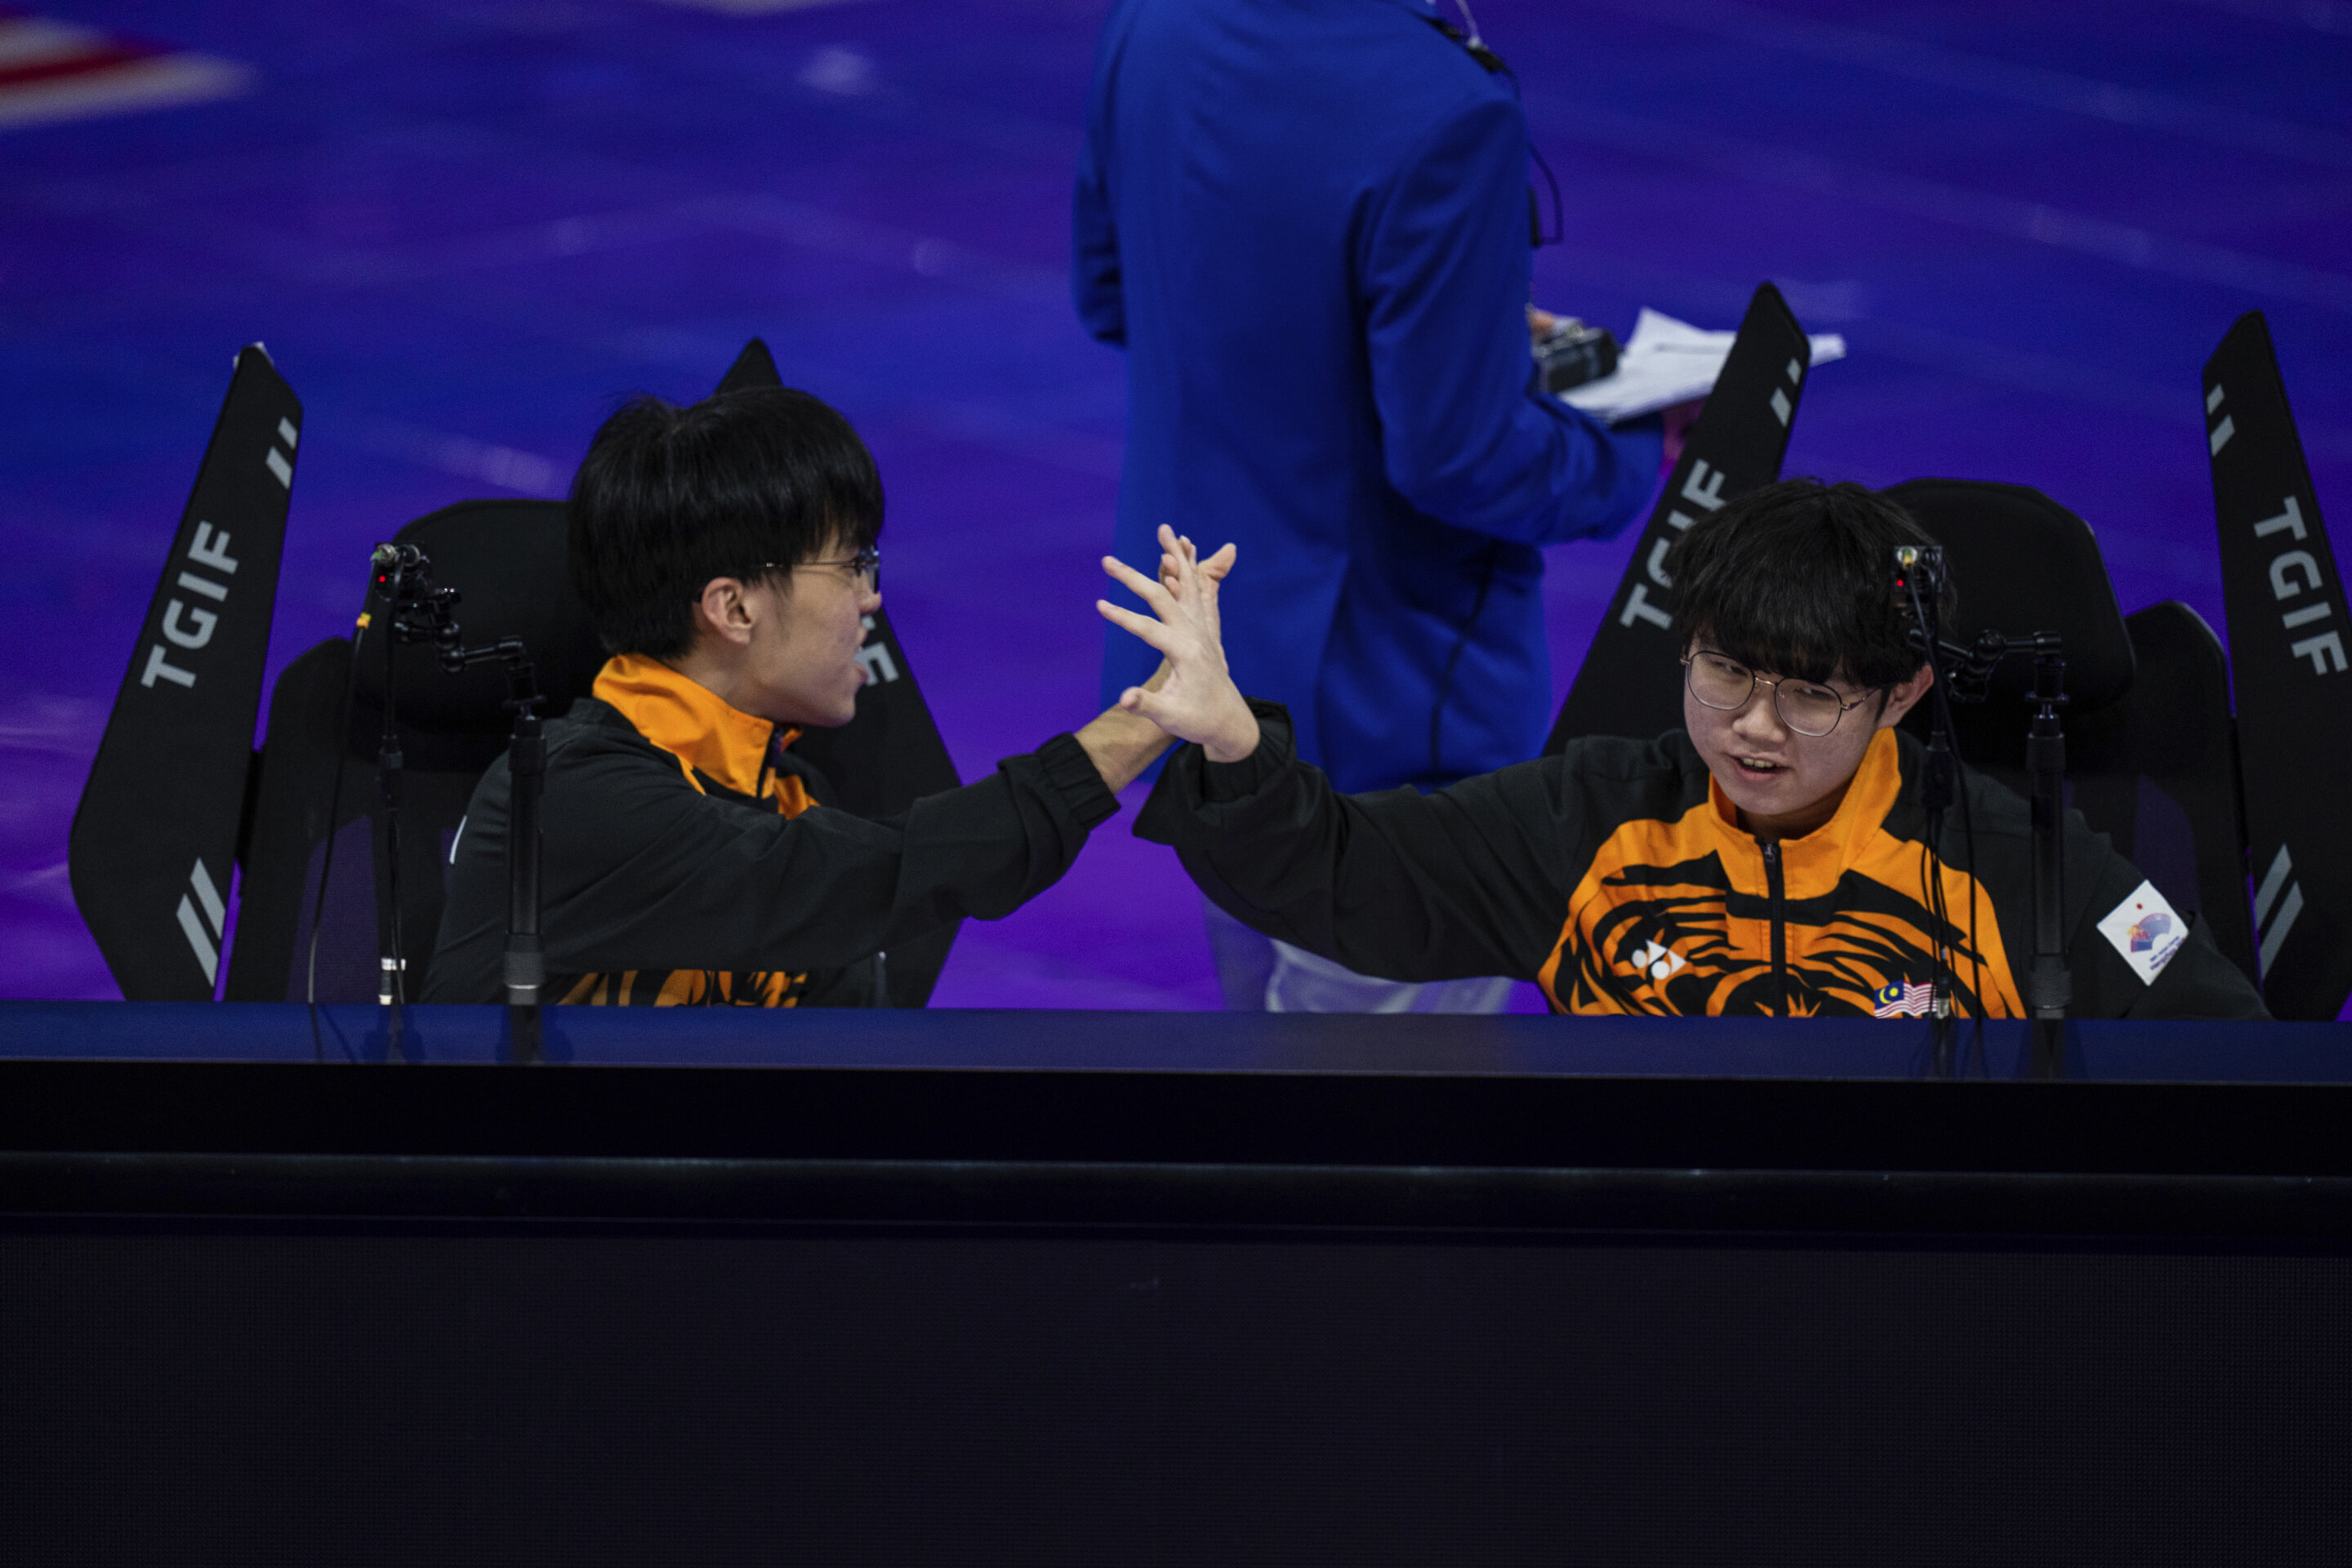 Desperate eSports fans in ticket-grabbing frenzy at Asian Games